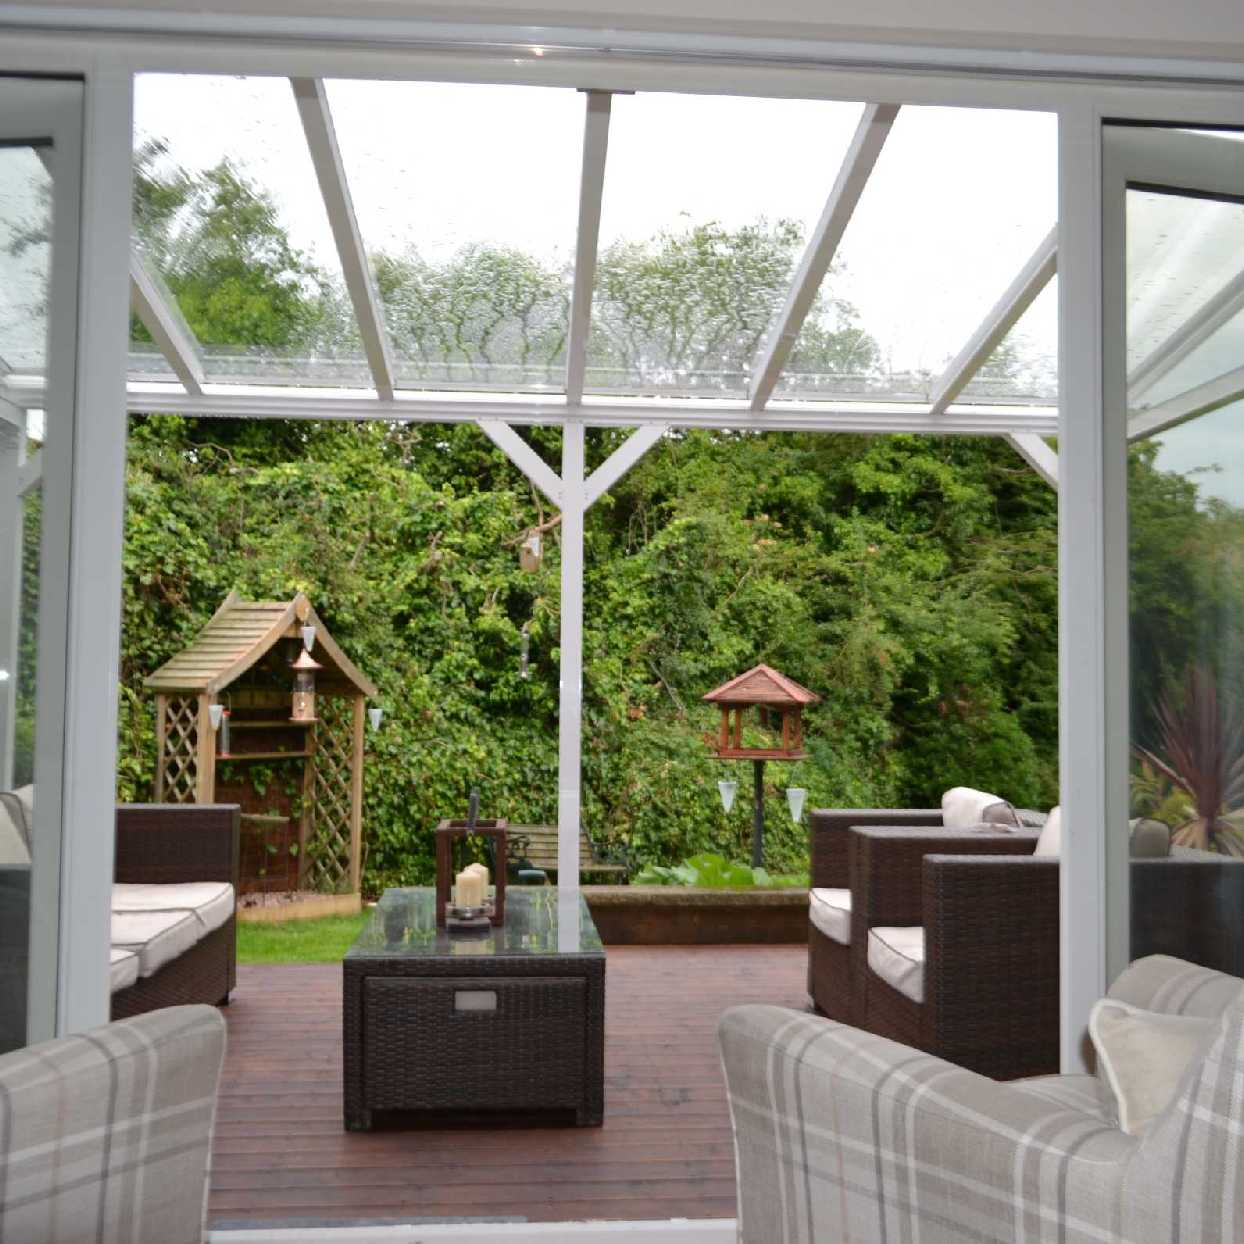 Great selection of Omega Smart Lean-To Canopy, White UNGLAZED for 6mm Glazing - 3.5m (W) x 1.5m (P), (3) Supporting Posts